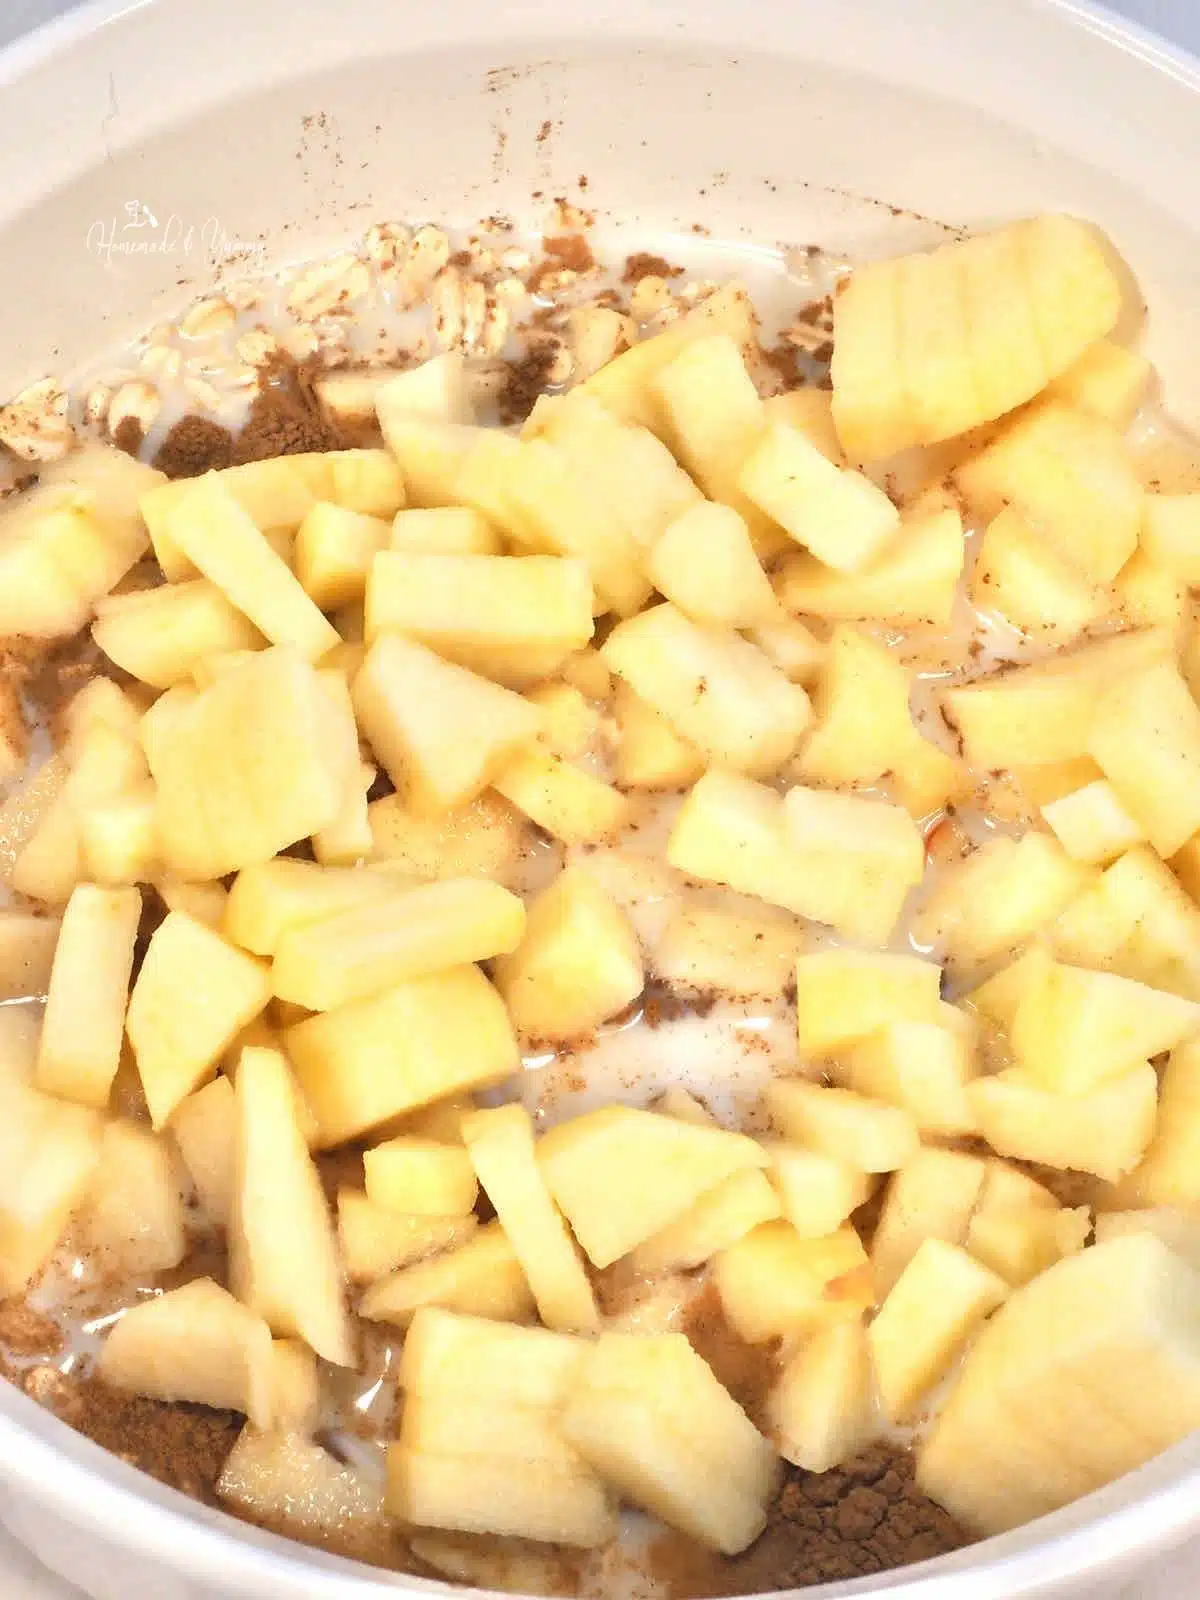 Apples, oats and other ingredients in a bowl.